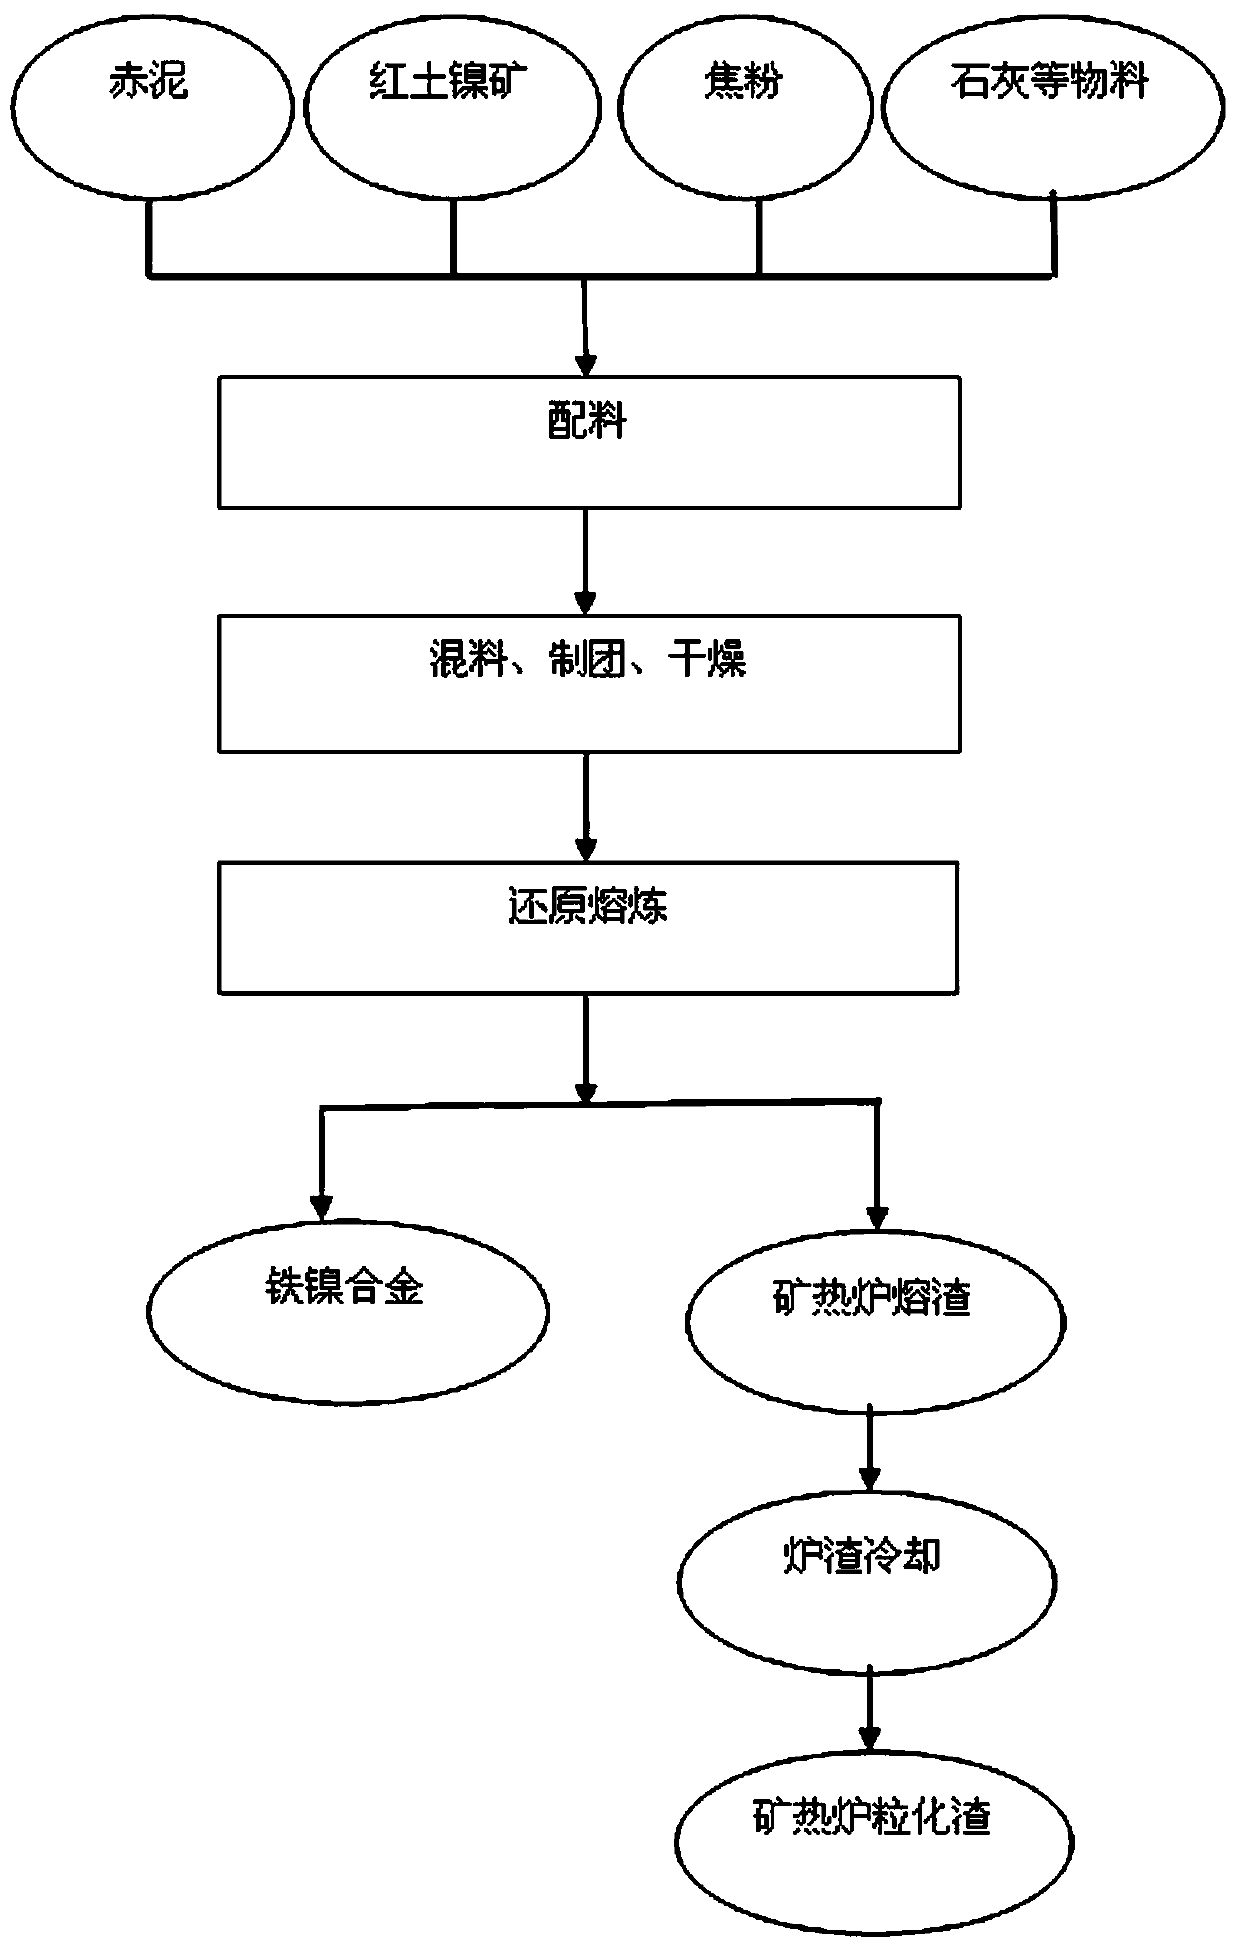 Method for preparing iron-nickel alloy by-product active submerged arc furnace granulated slag by using red mud and laterite nickel ore